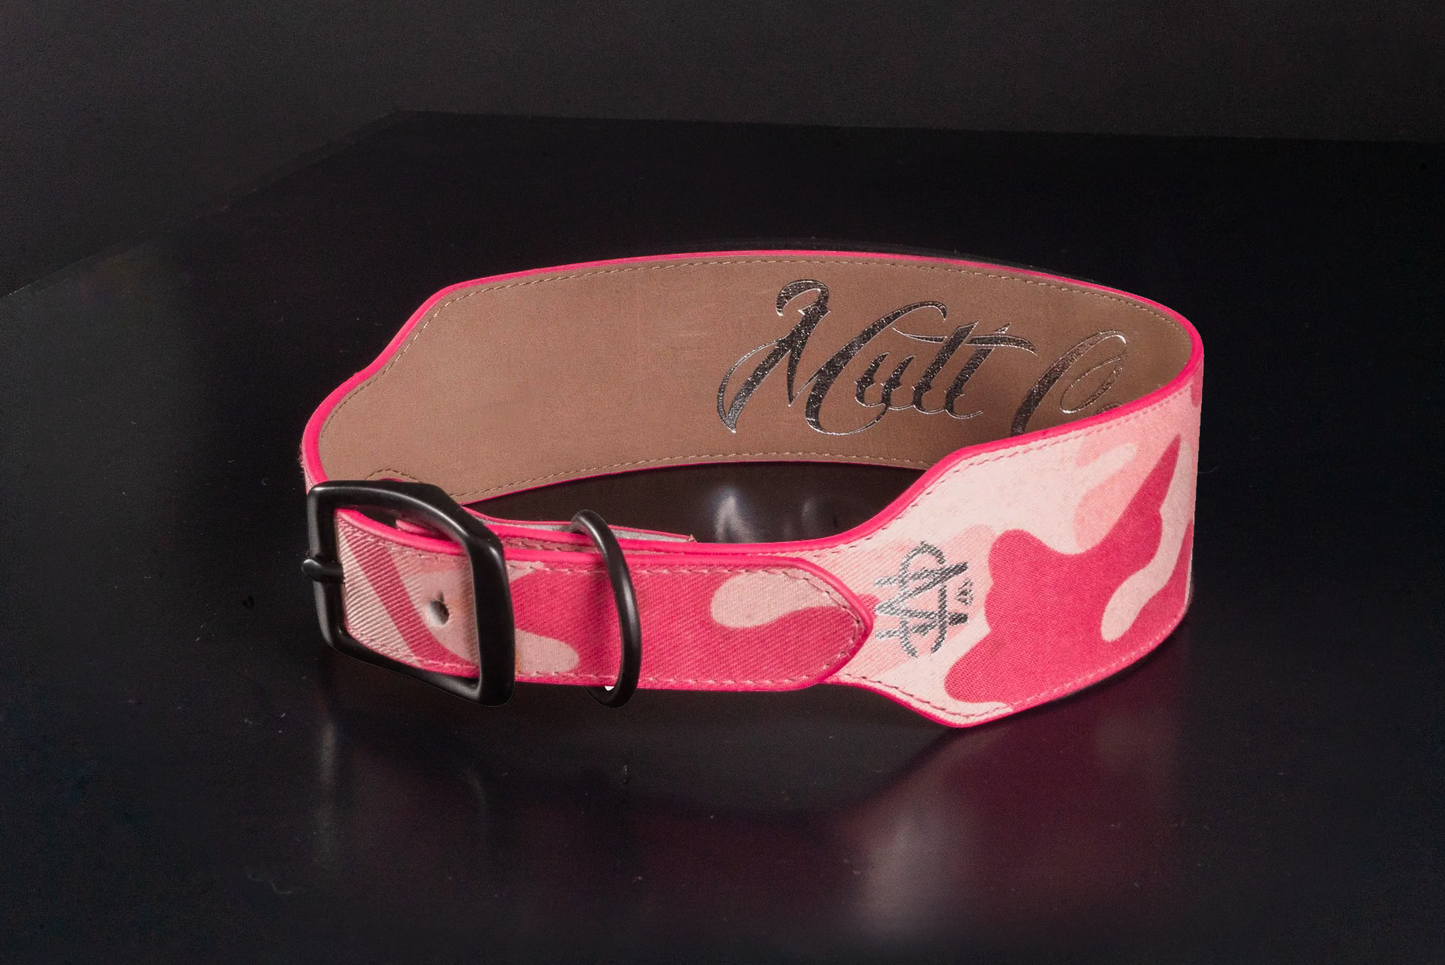 Pink Camouflage Leather Dog Collar